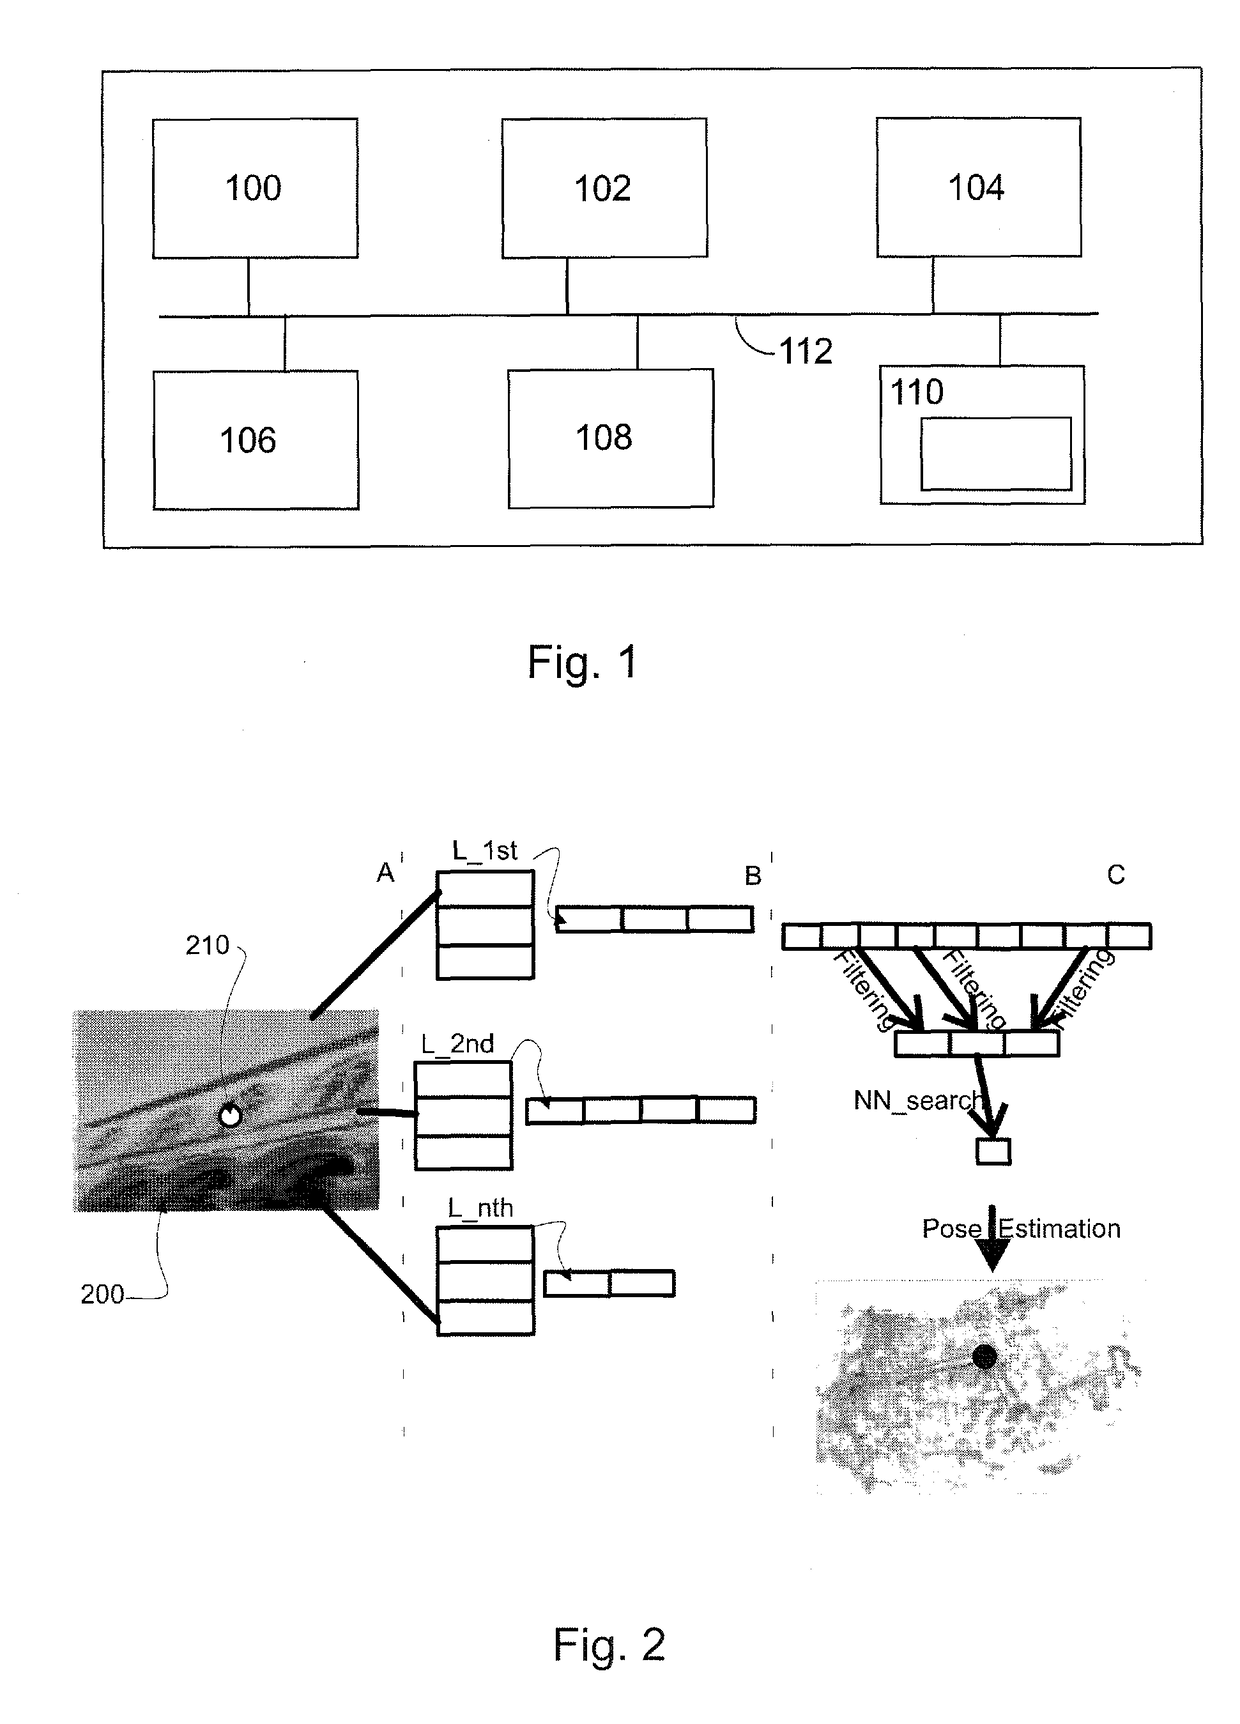 Localization and mapping method